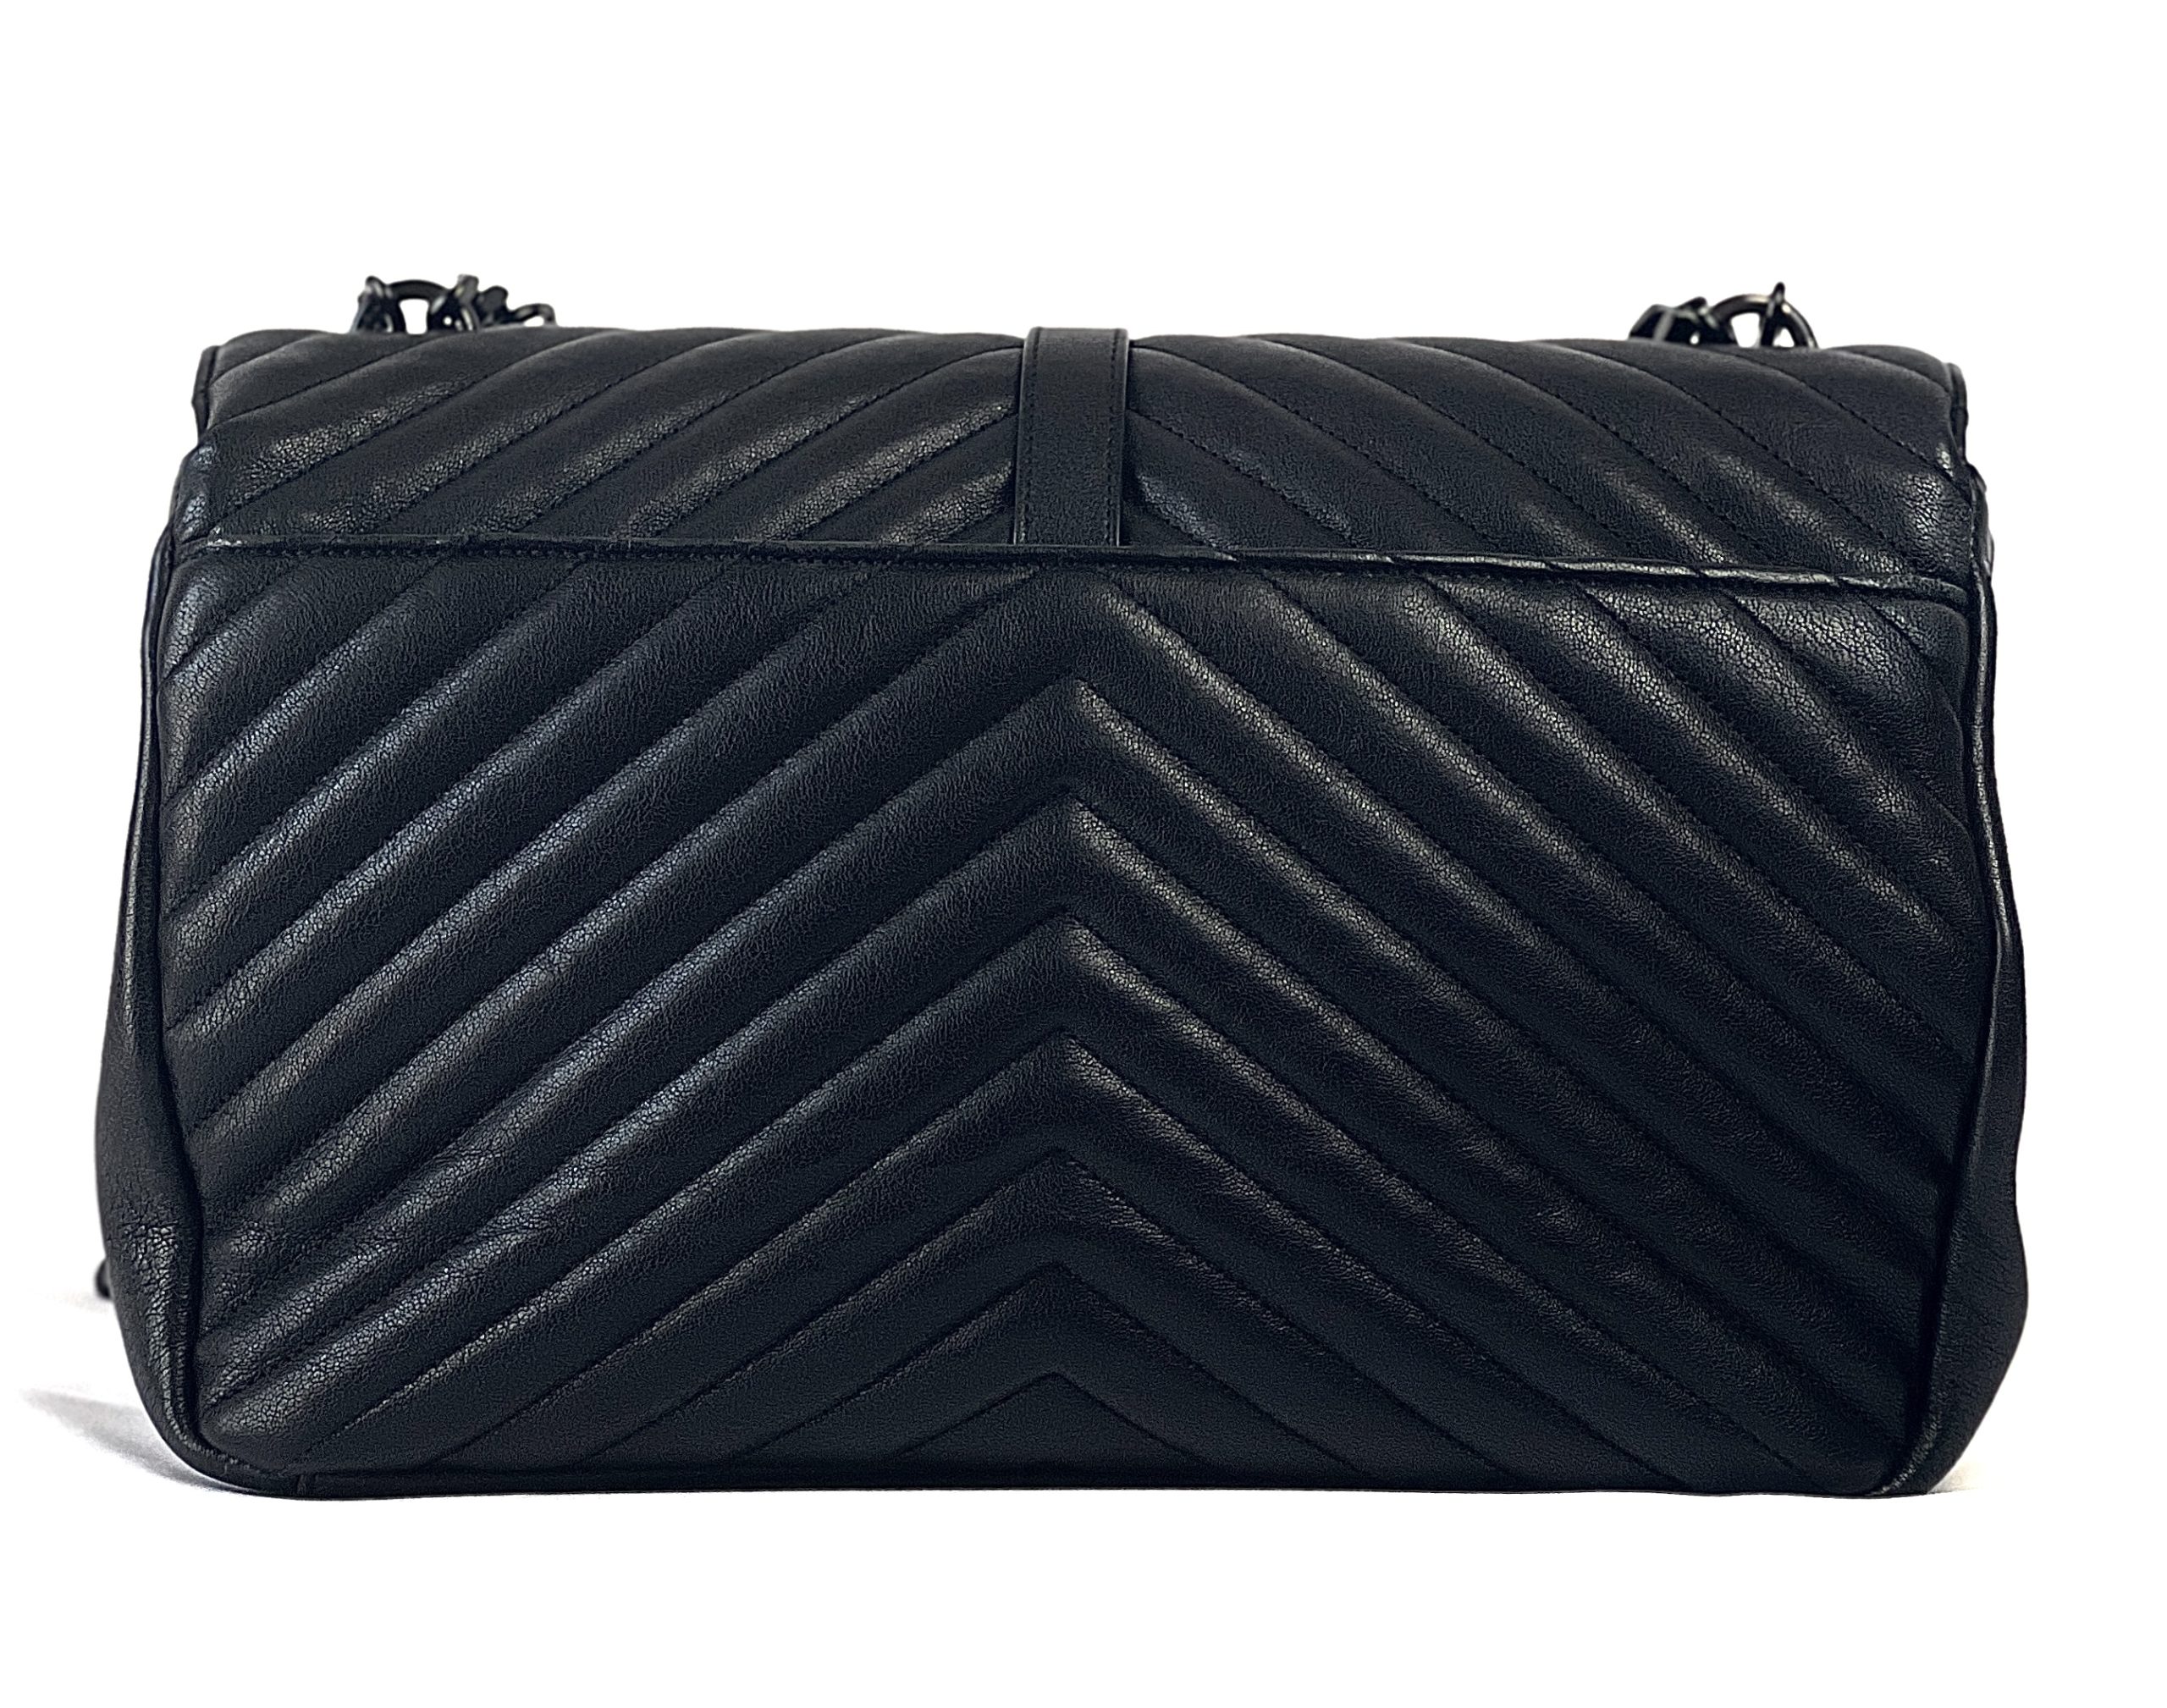 SAINT LAURENT: Toy Loulou bag in quilted leather - Black | SAINT LAURENT  mini bag 678401DV706 online at GIGLIO.COM